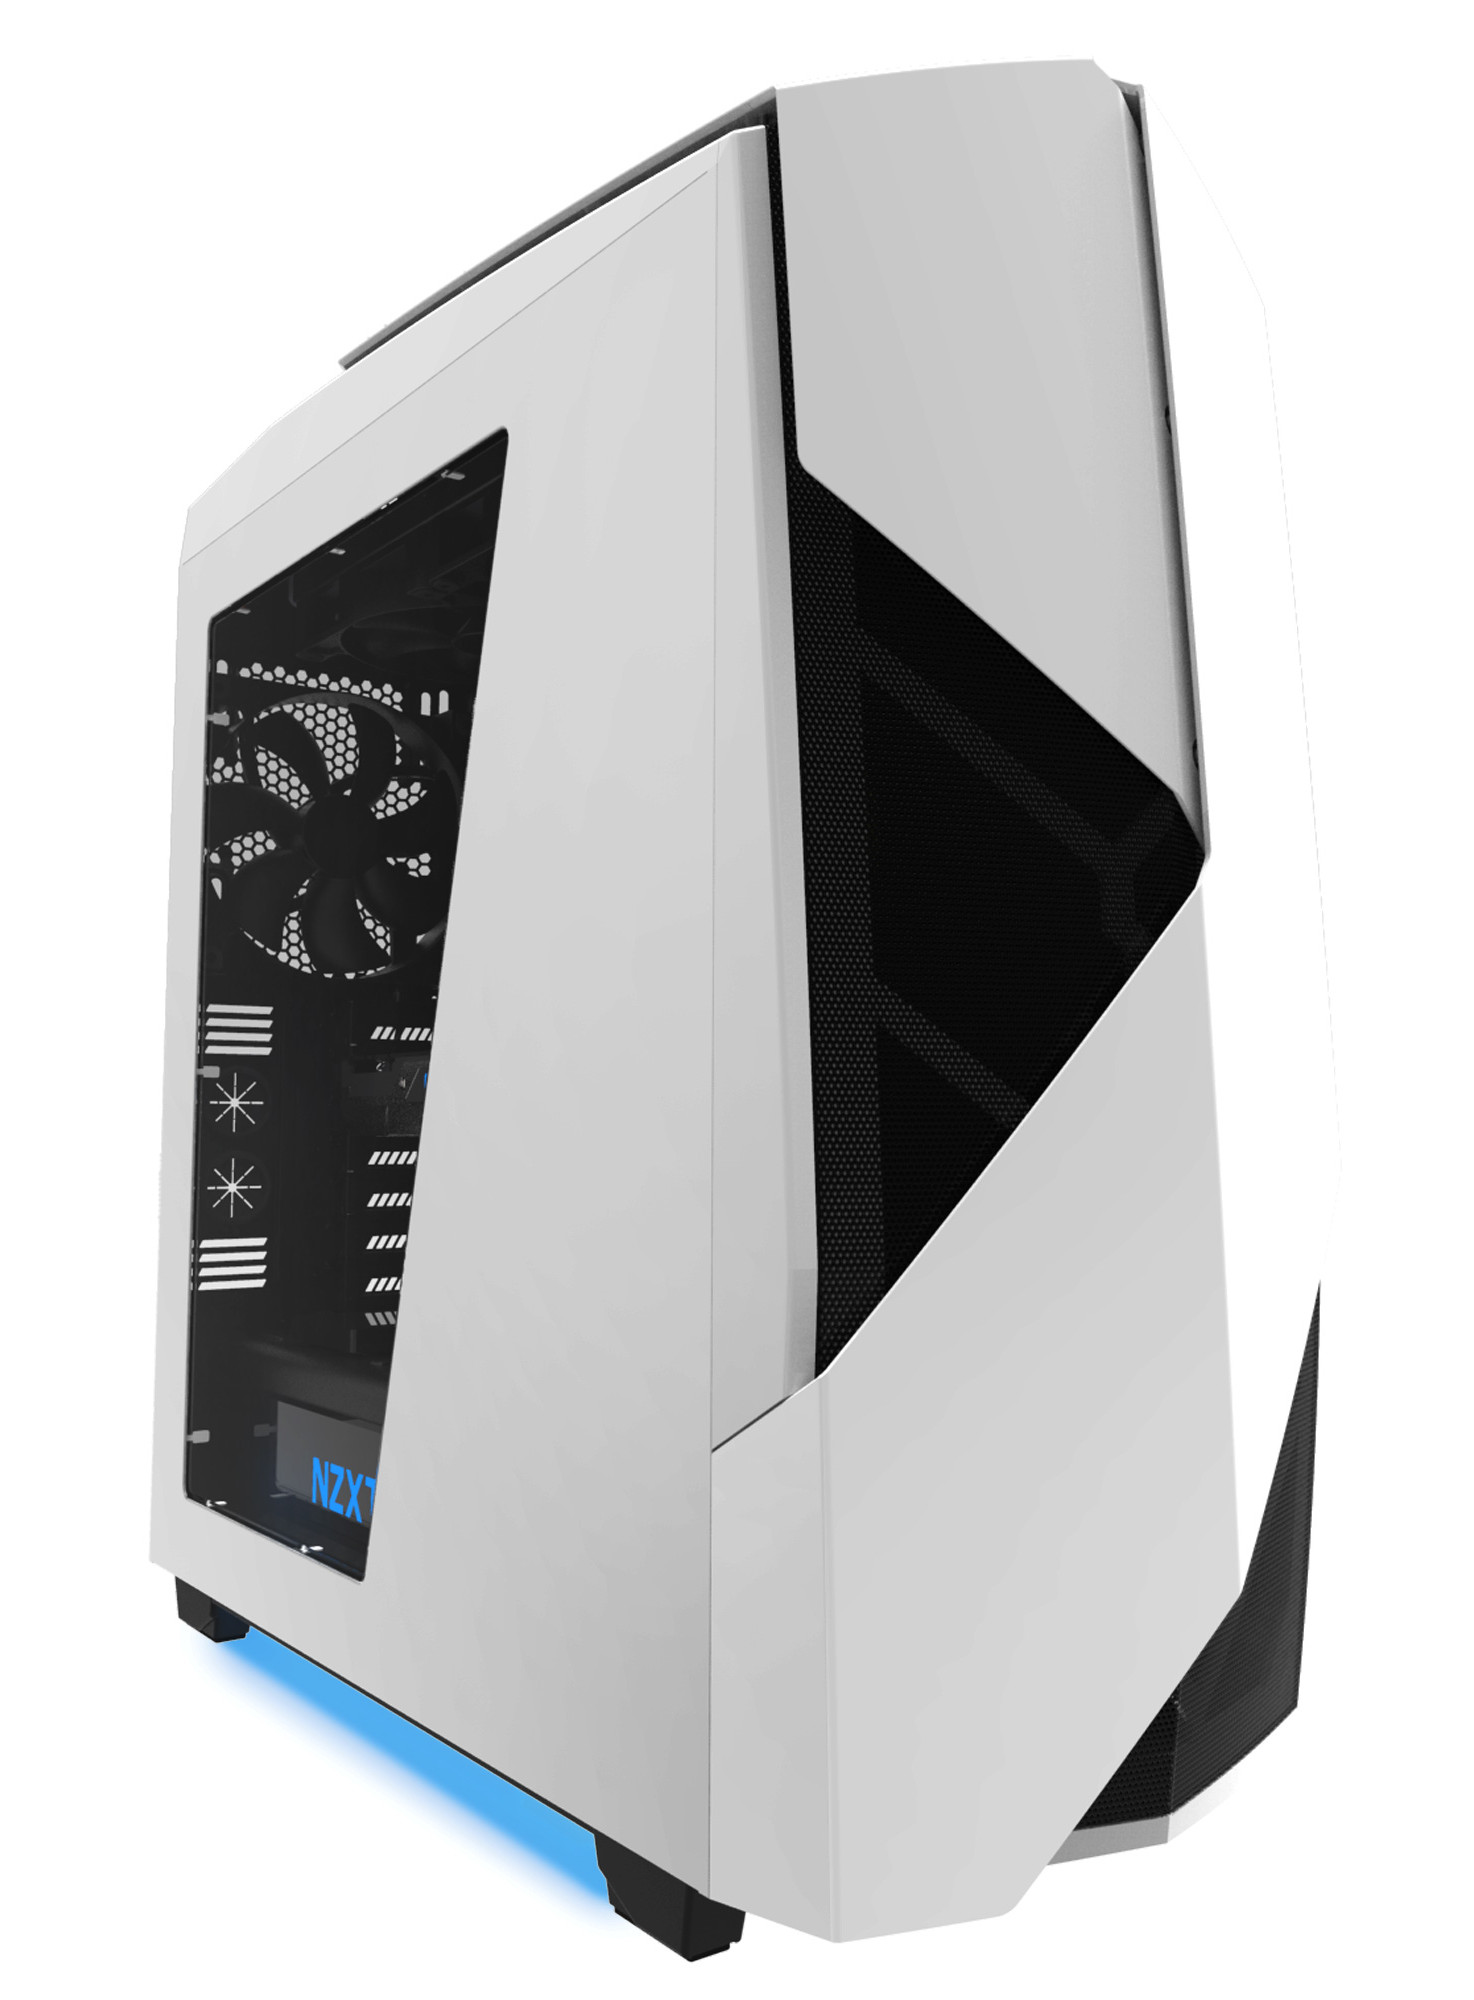 NZXT Introduces New Noctis 450 Case - Modders Inc